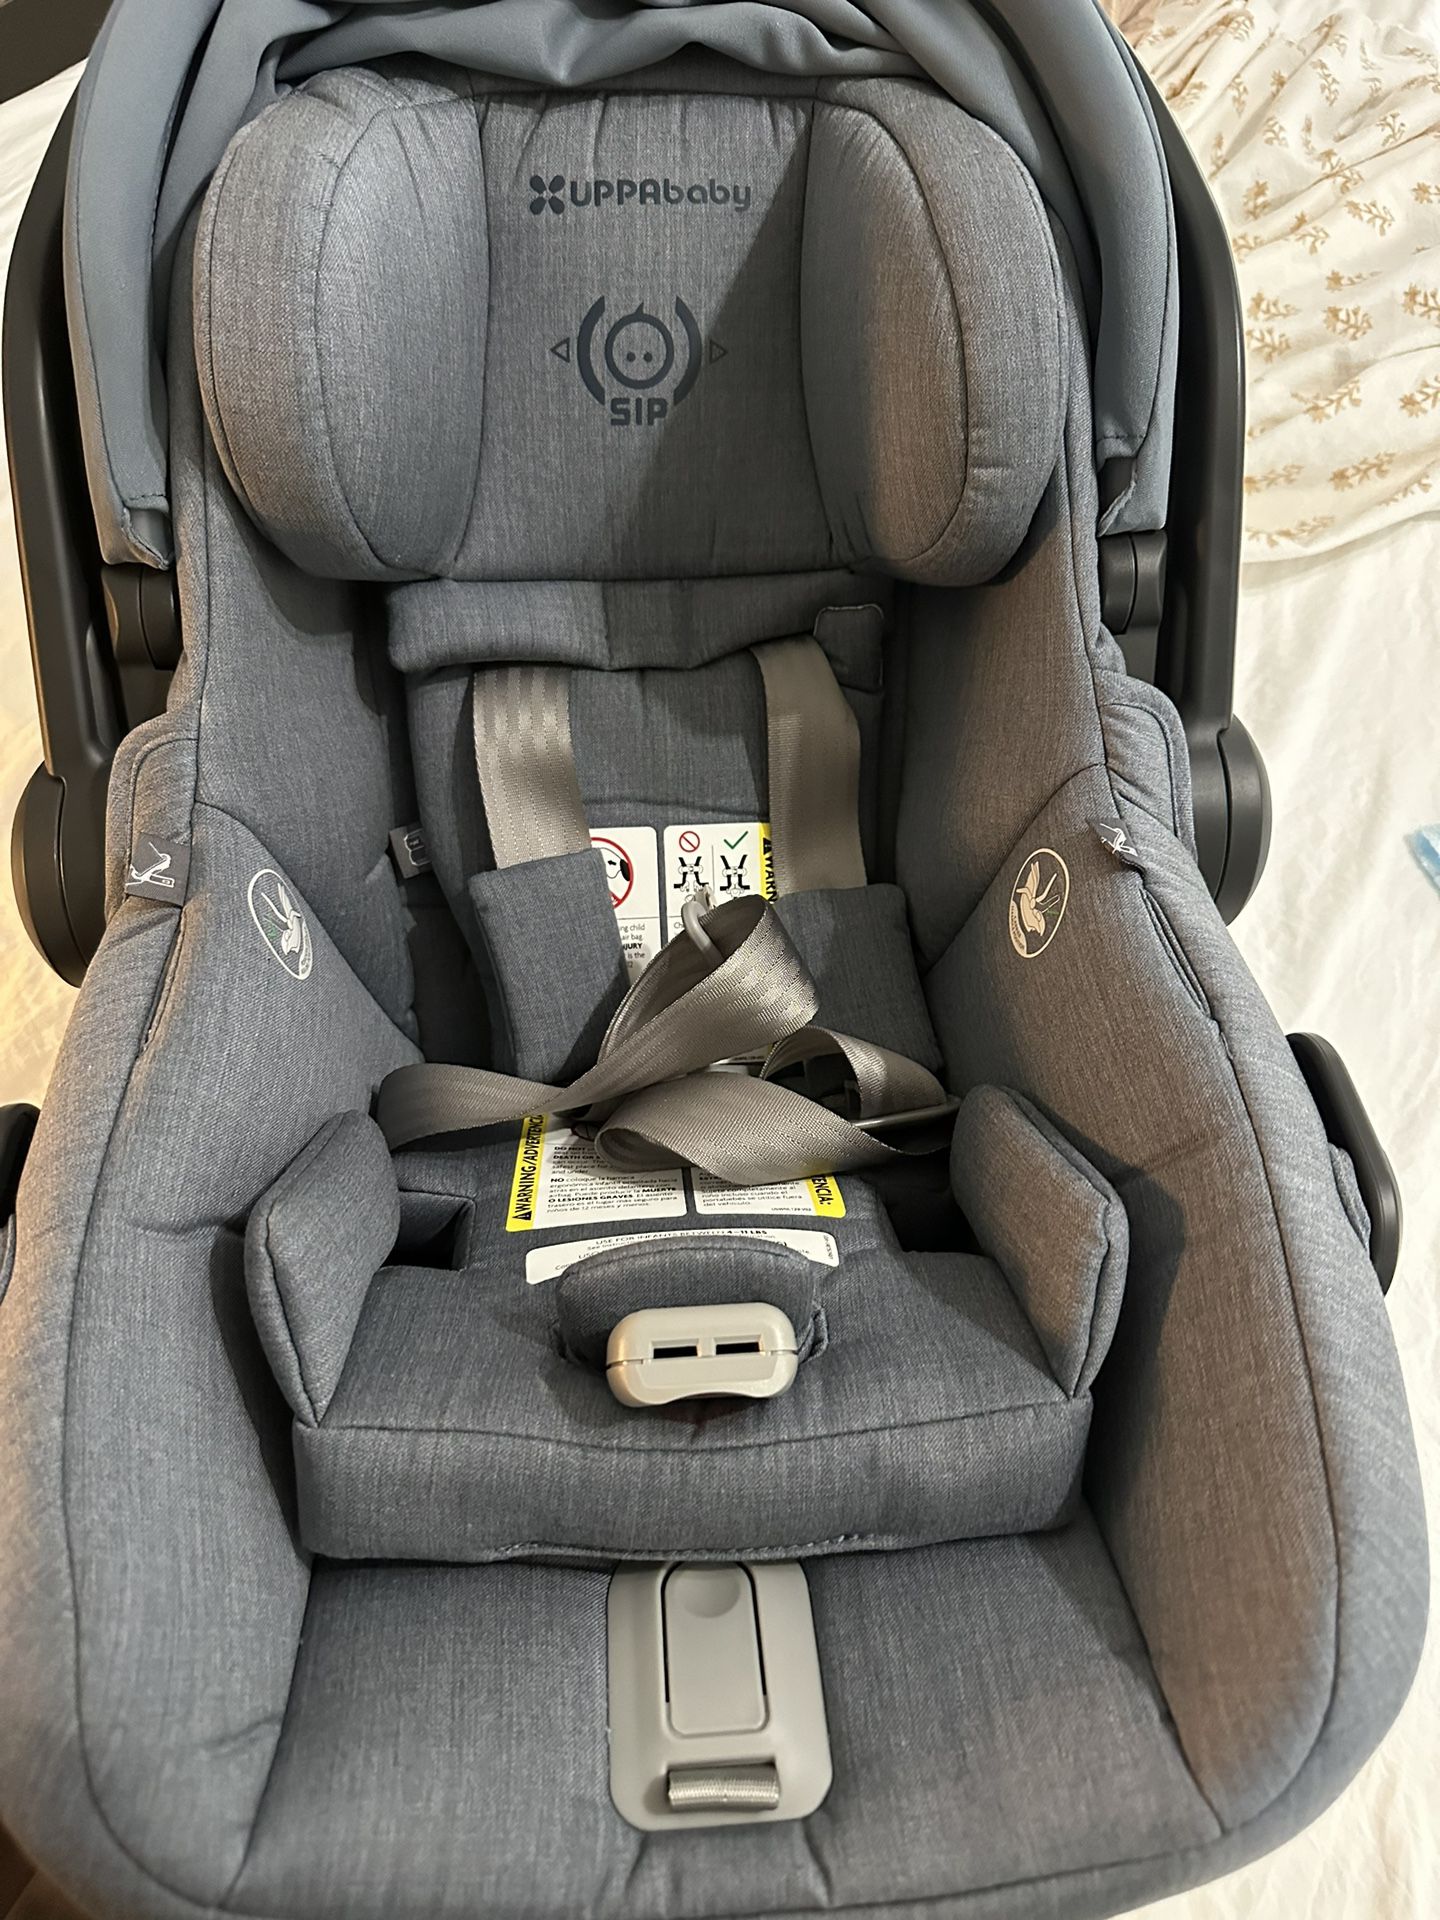 UppaBaby Infant Car Seat